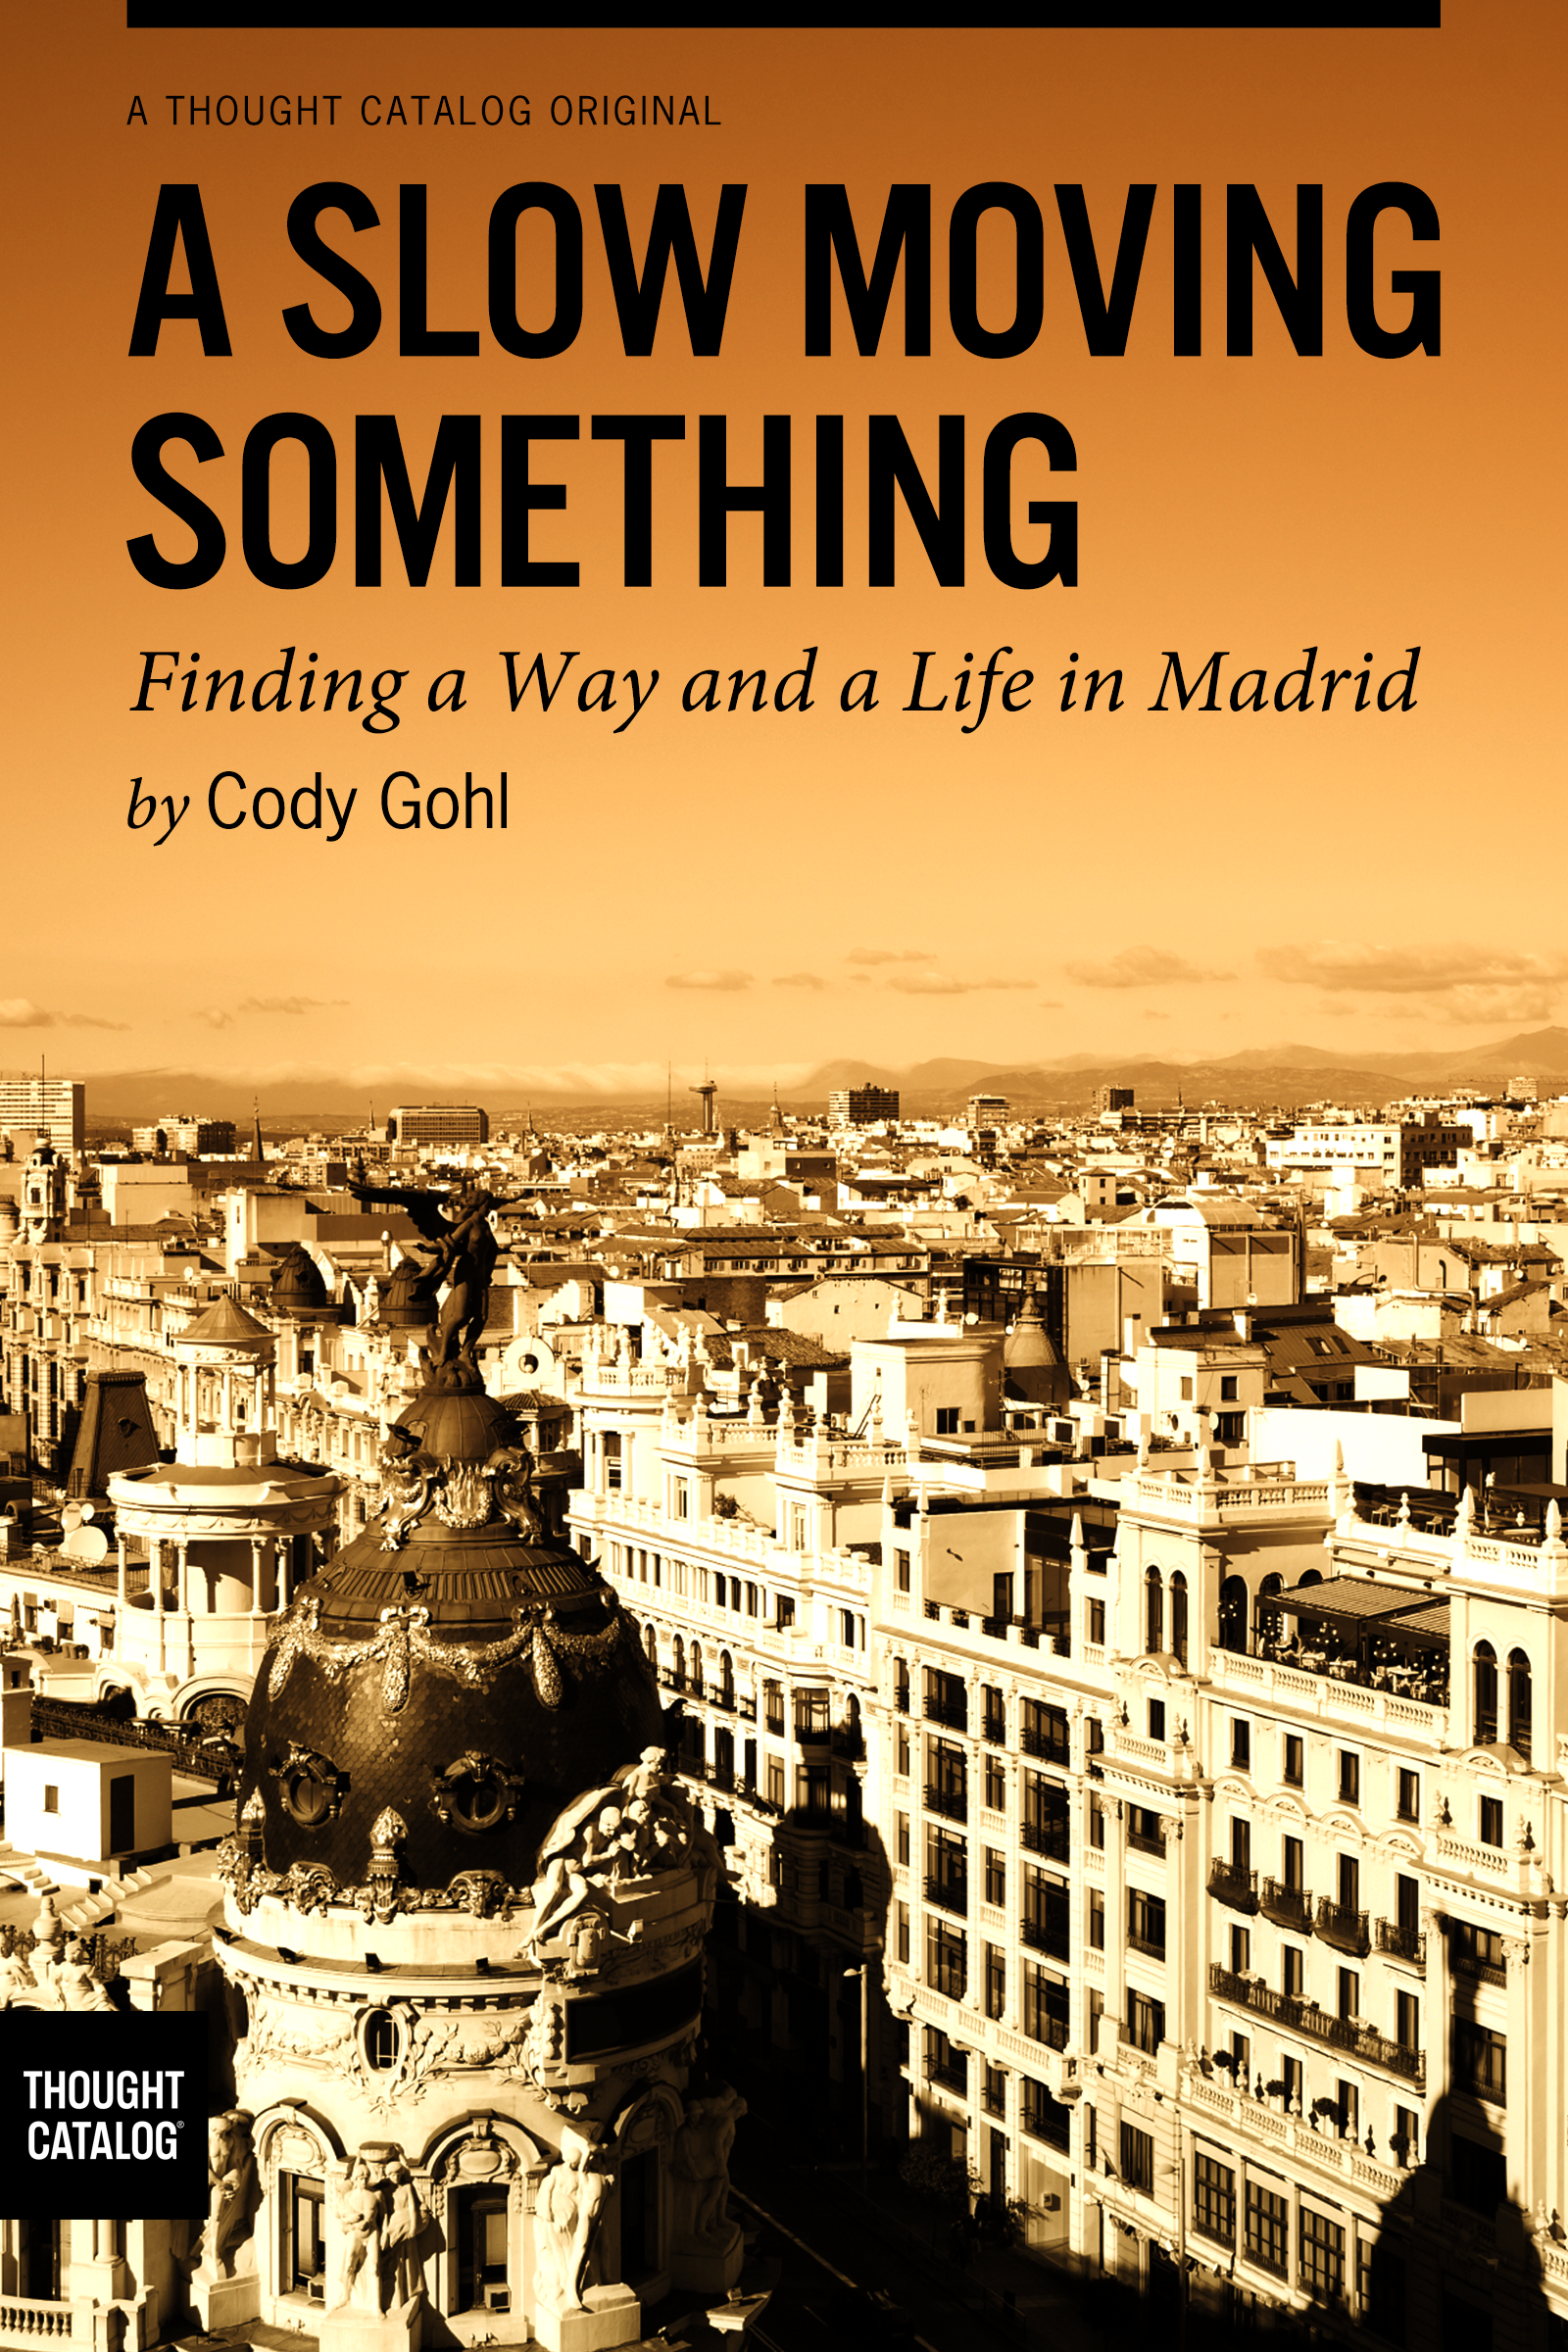 You can buy Cody's eBook about living abroad here.